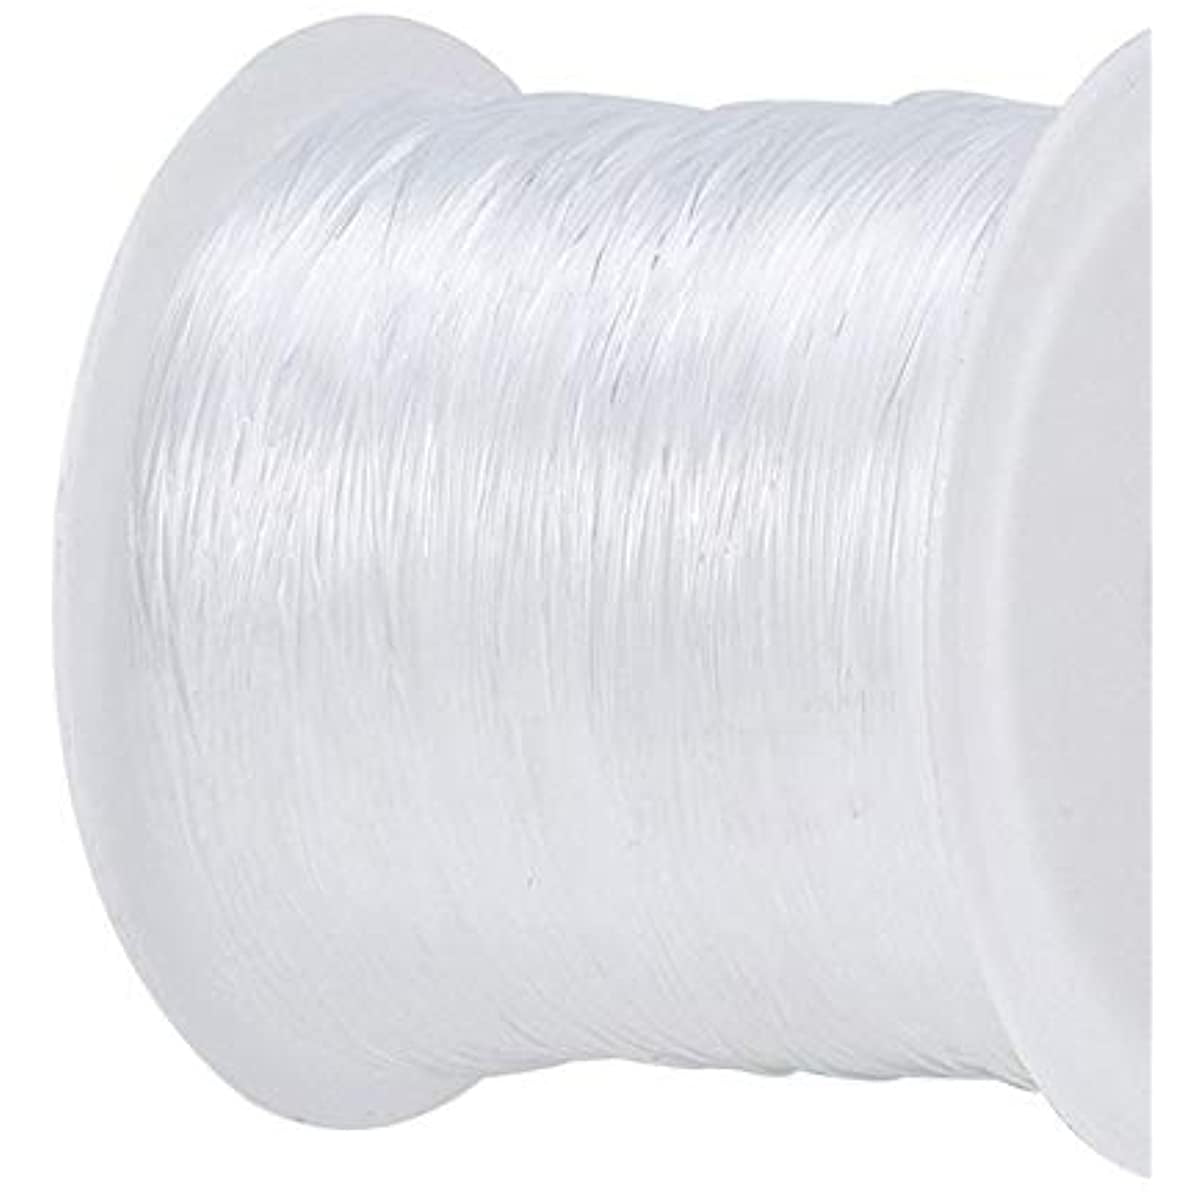 2 Rolls Fishing Line Clear Nylon Fish String Cord Crystal Nylon Thread  Fishing Line Wire for Craft Bracelet Beads,180 Yards 0.3 mm (329 m in  Total, No